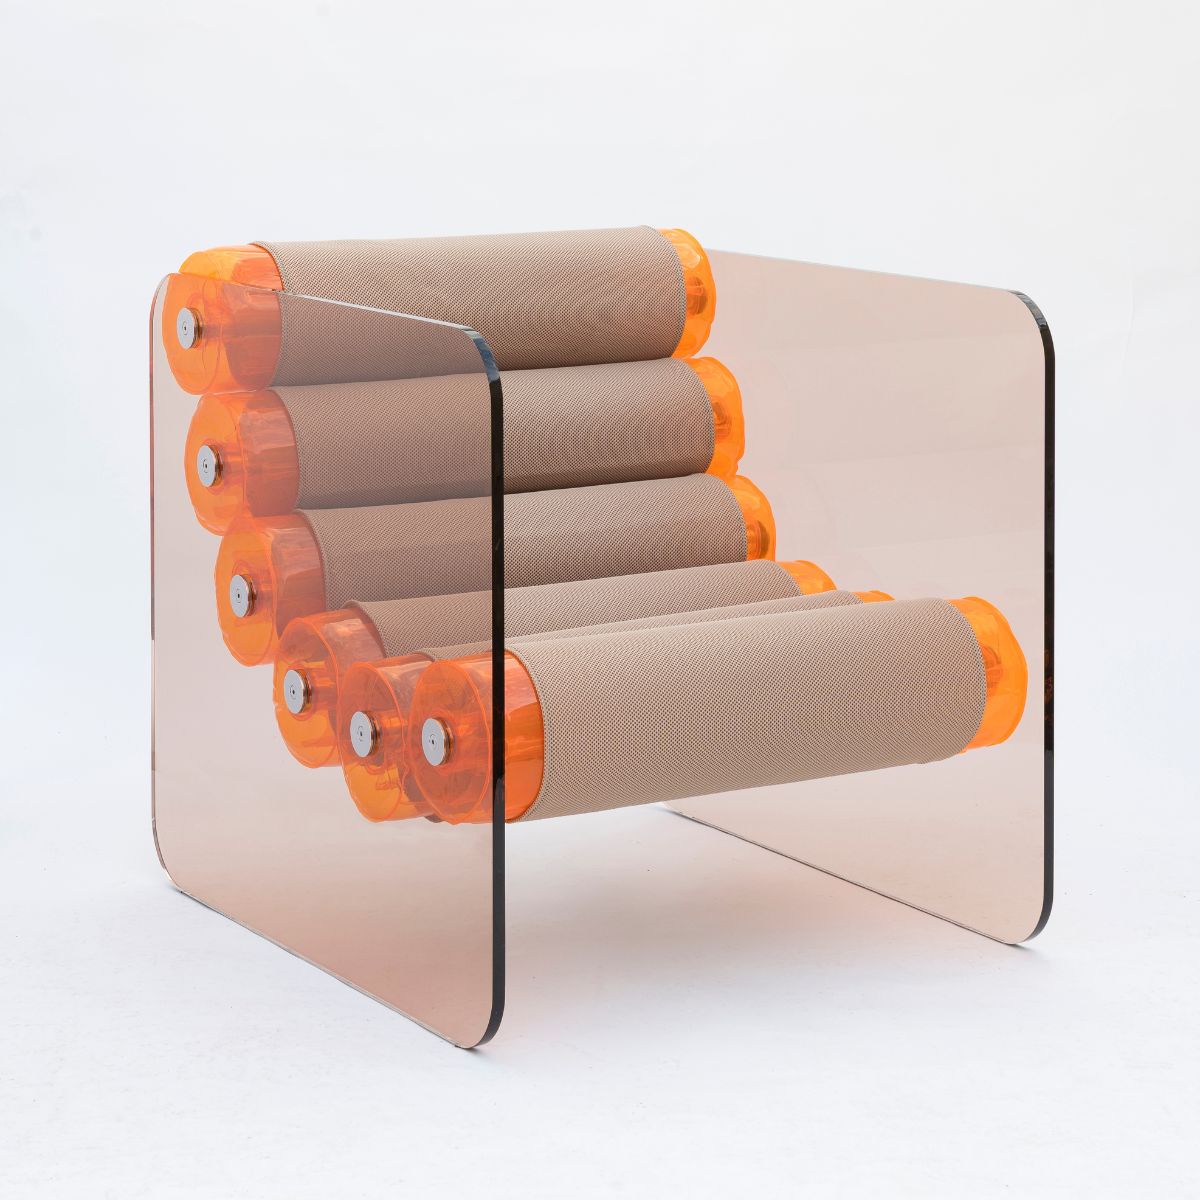 MW02 - Armchair with PMMA structure, orange and beige